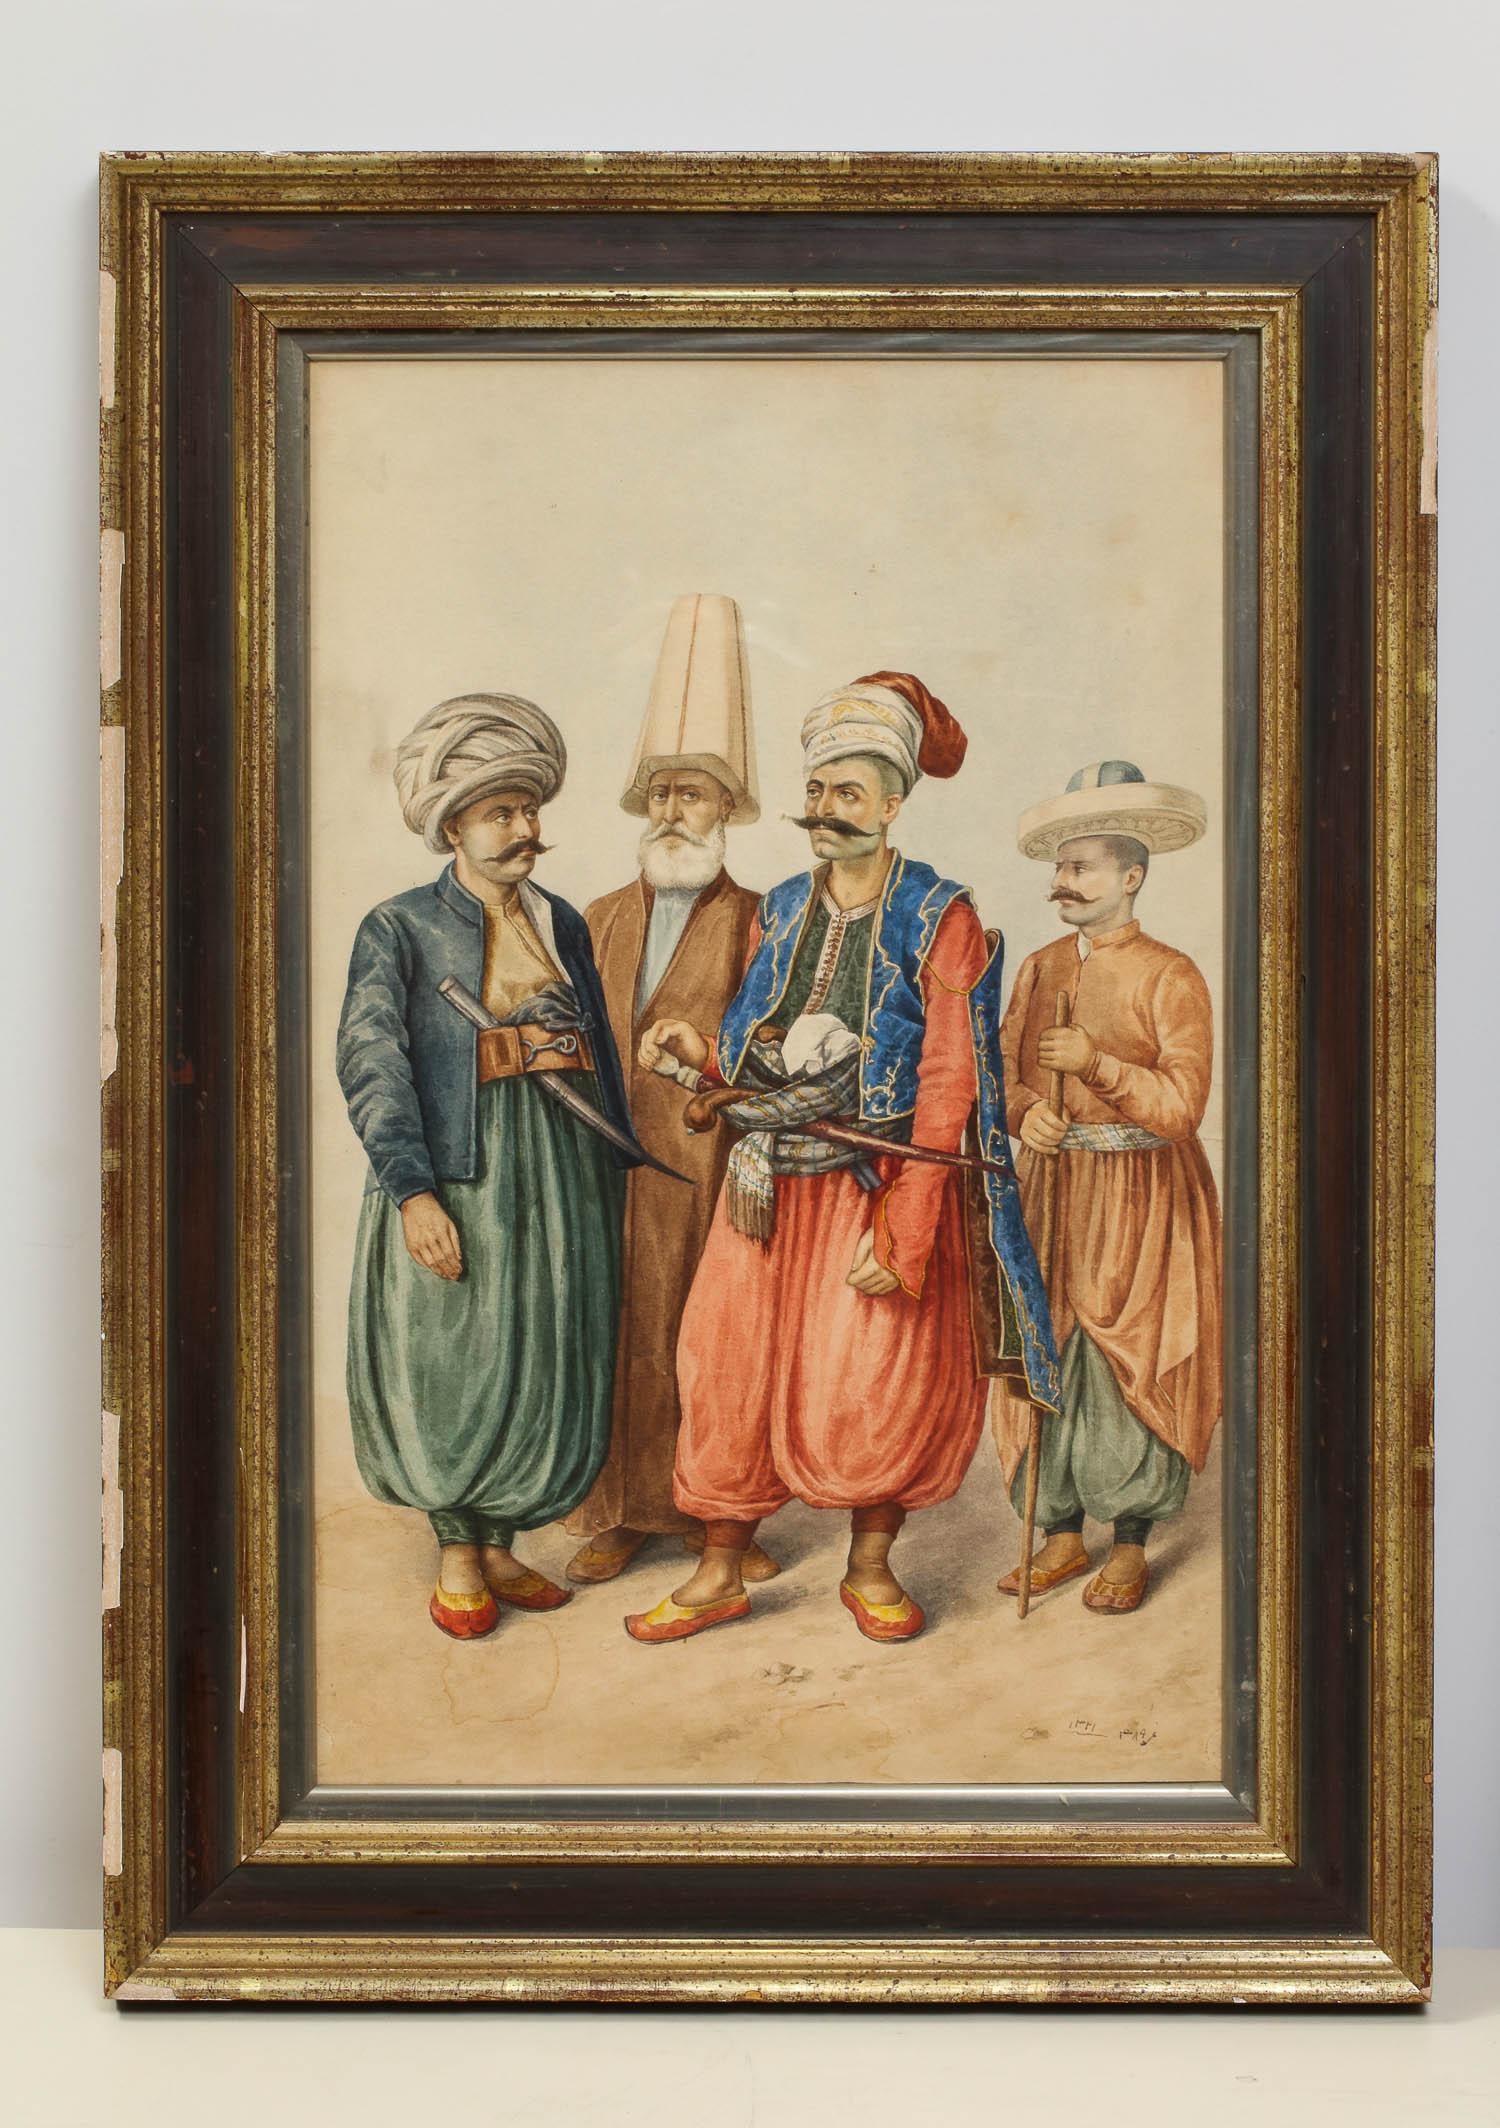 Magnificent pair of Islamic, Turkish ottoman hand-painted watercolors of Sultans,
signed Hossein and dated 1804.

Very high quality pair of watercolors in original frames.

Wear to the frames, otherwise excellent condition. Ready to